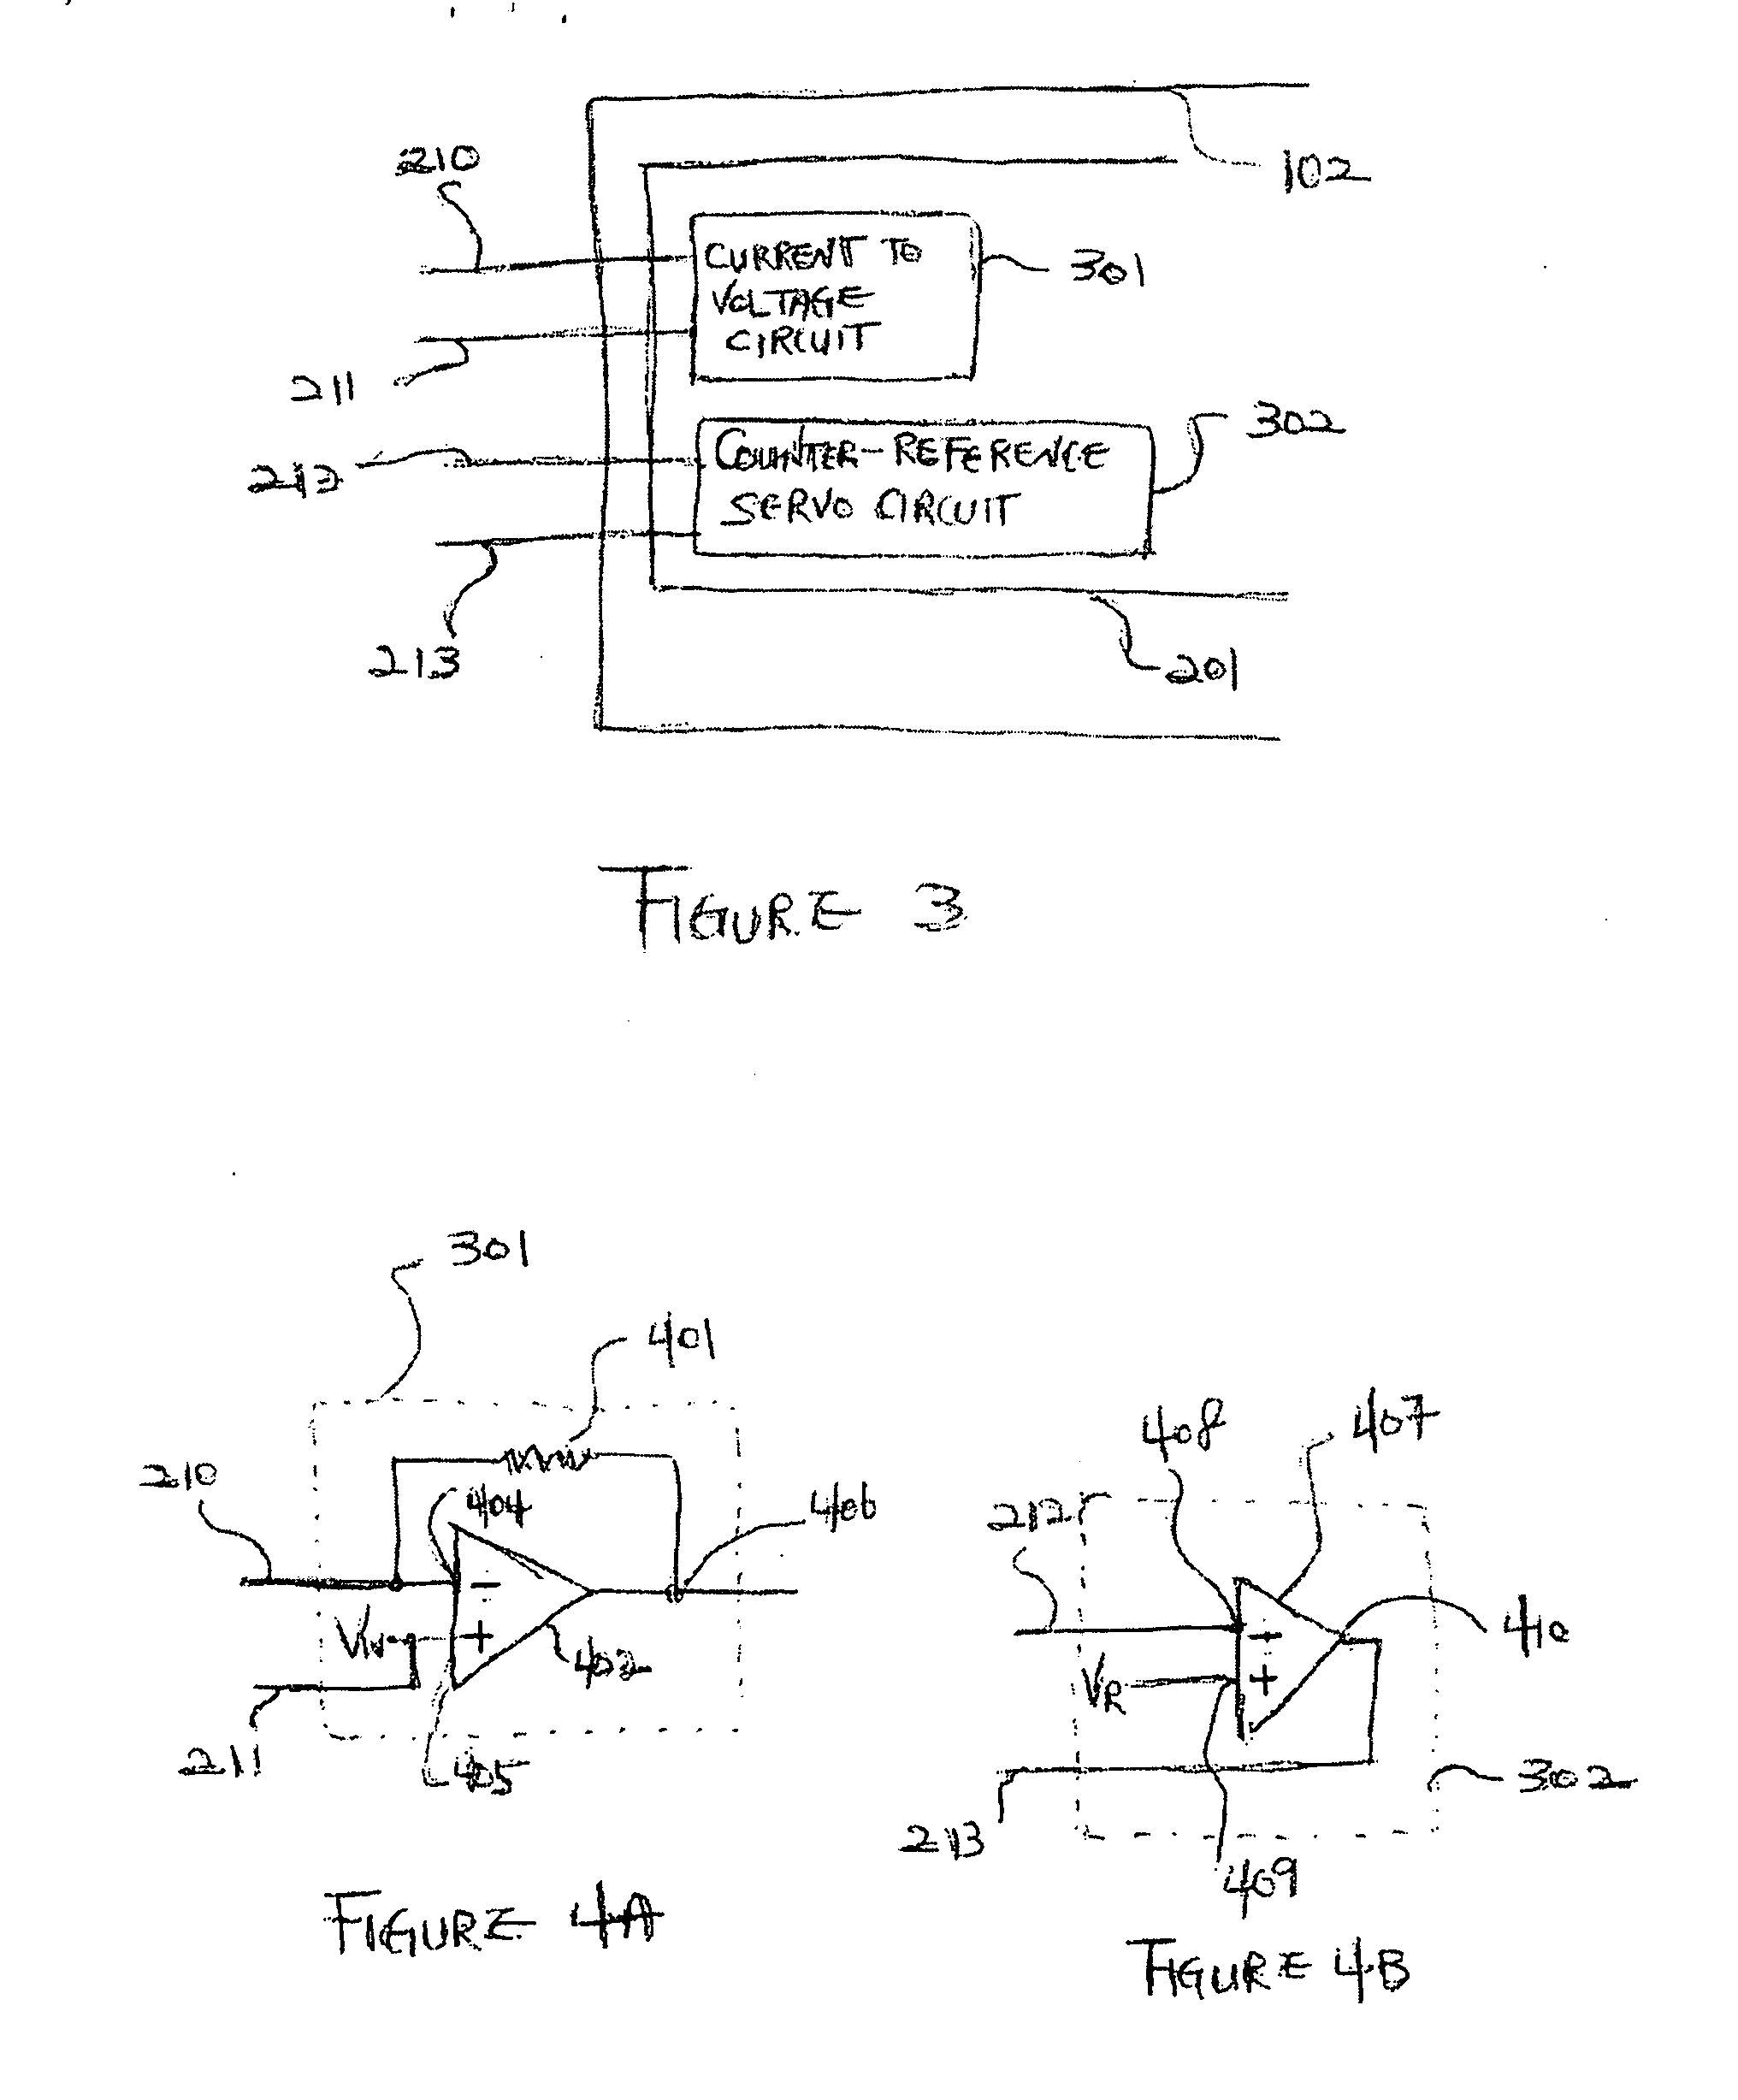 Method and apparatus for providing rechargeable power in data monitoring and management systems